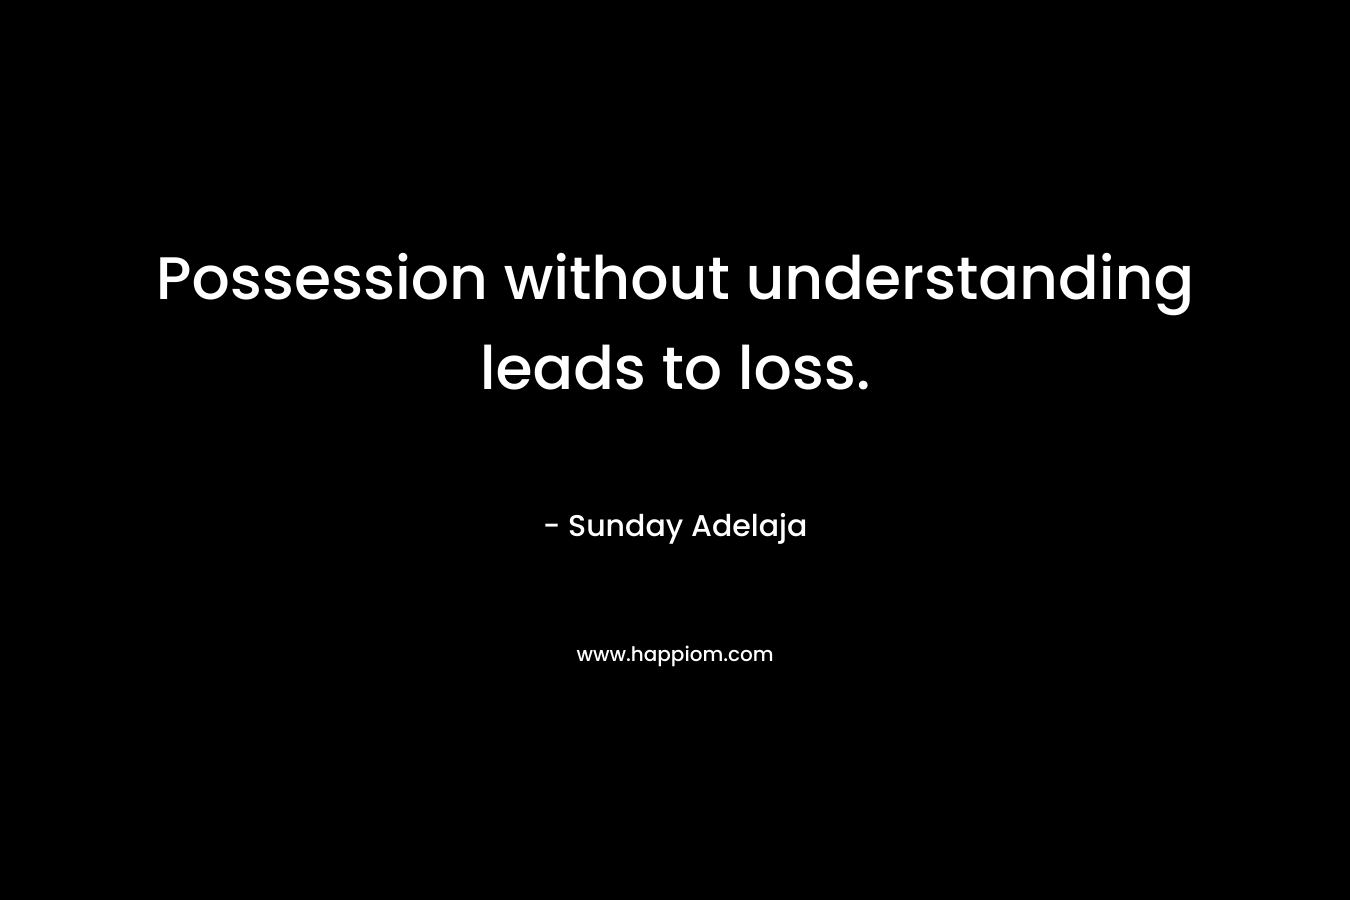 Possession without understanding leads to loss.